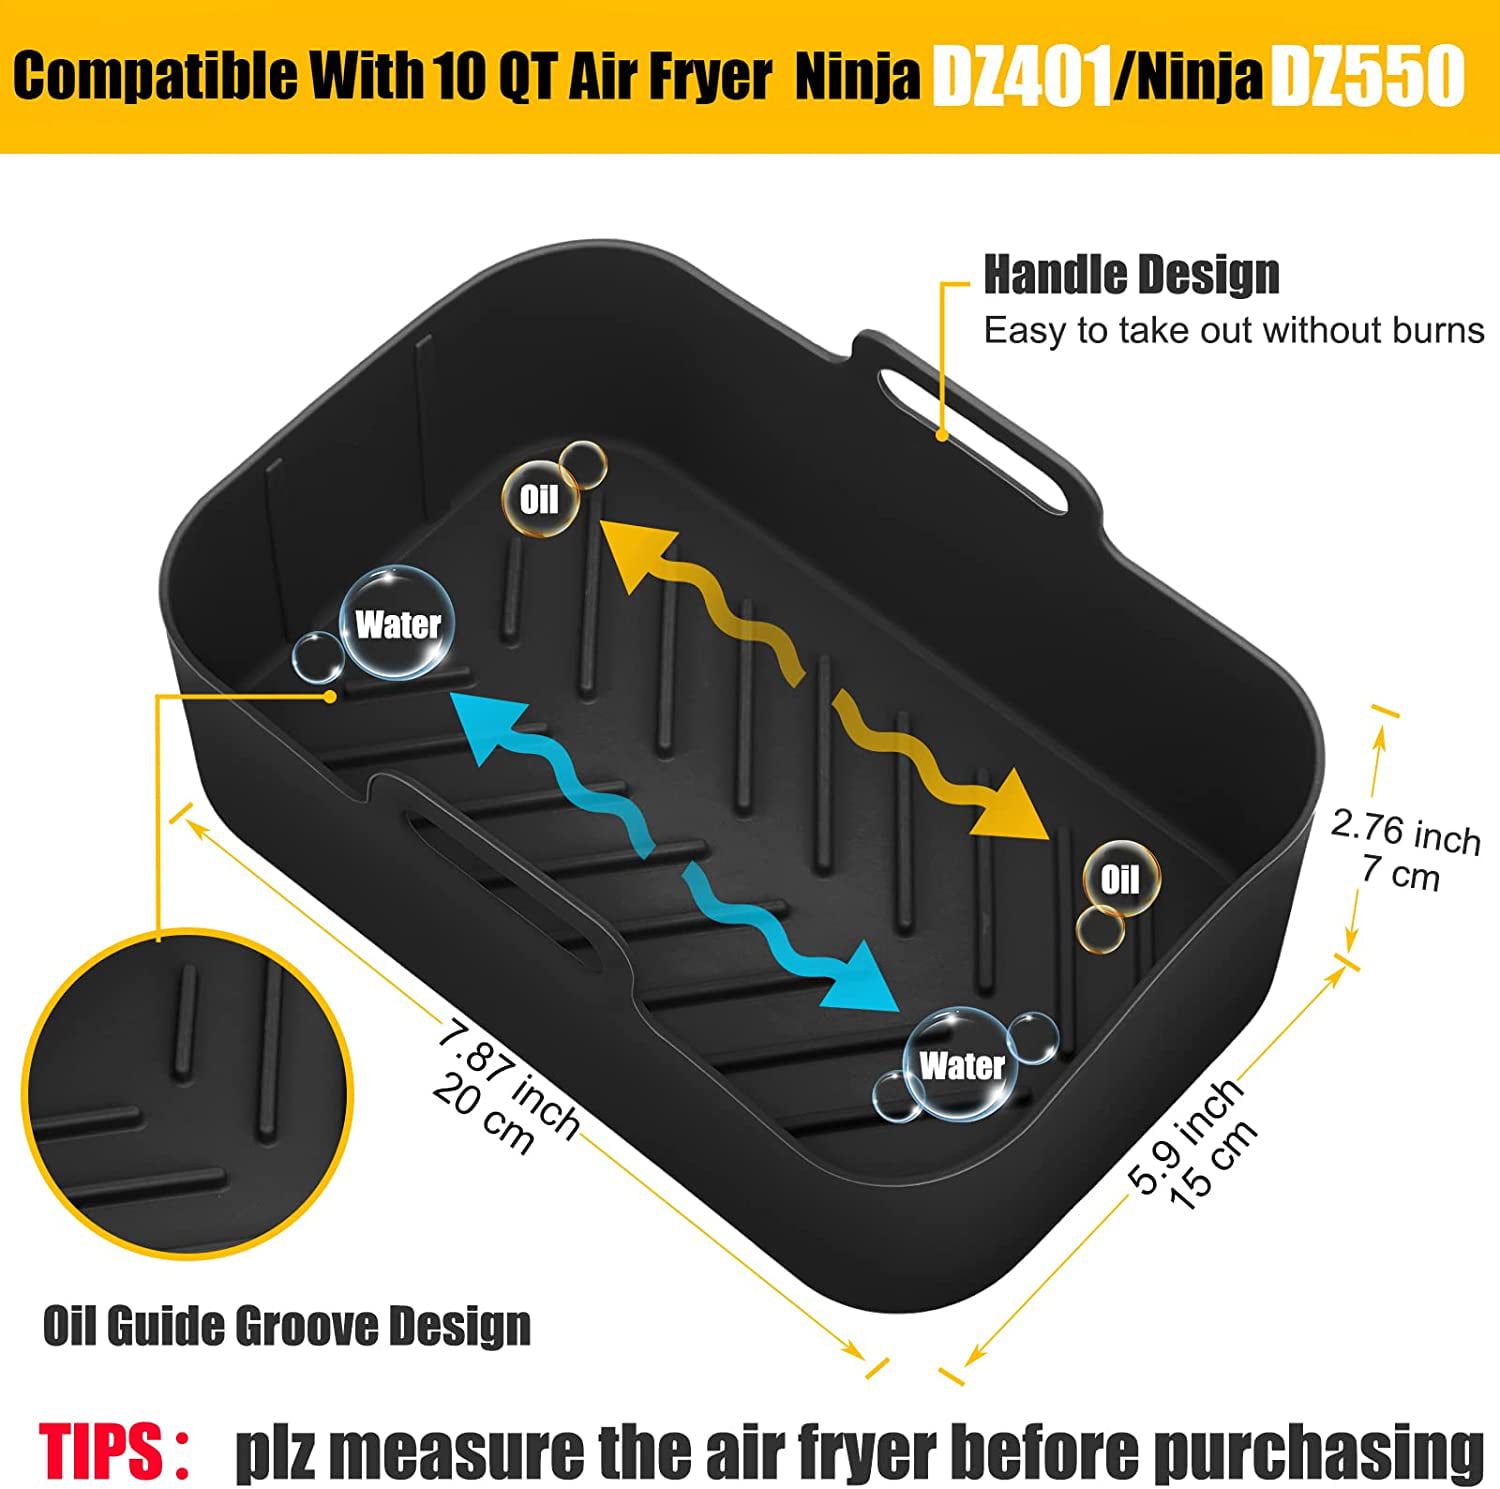 Jytue 2pcs Dual Air Fryer Silicone Pots Rectangle Air Fryer Liner Baskets for Ninja Foodi Dz201 Dz401 8 to 10 qt Easy Cleaning Food Safe Air Fryer